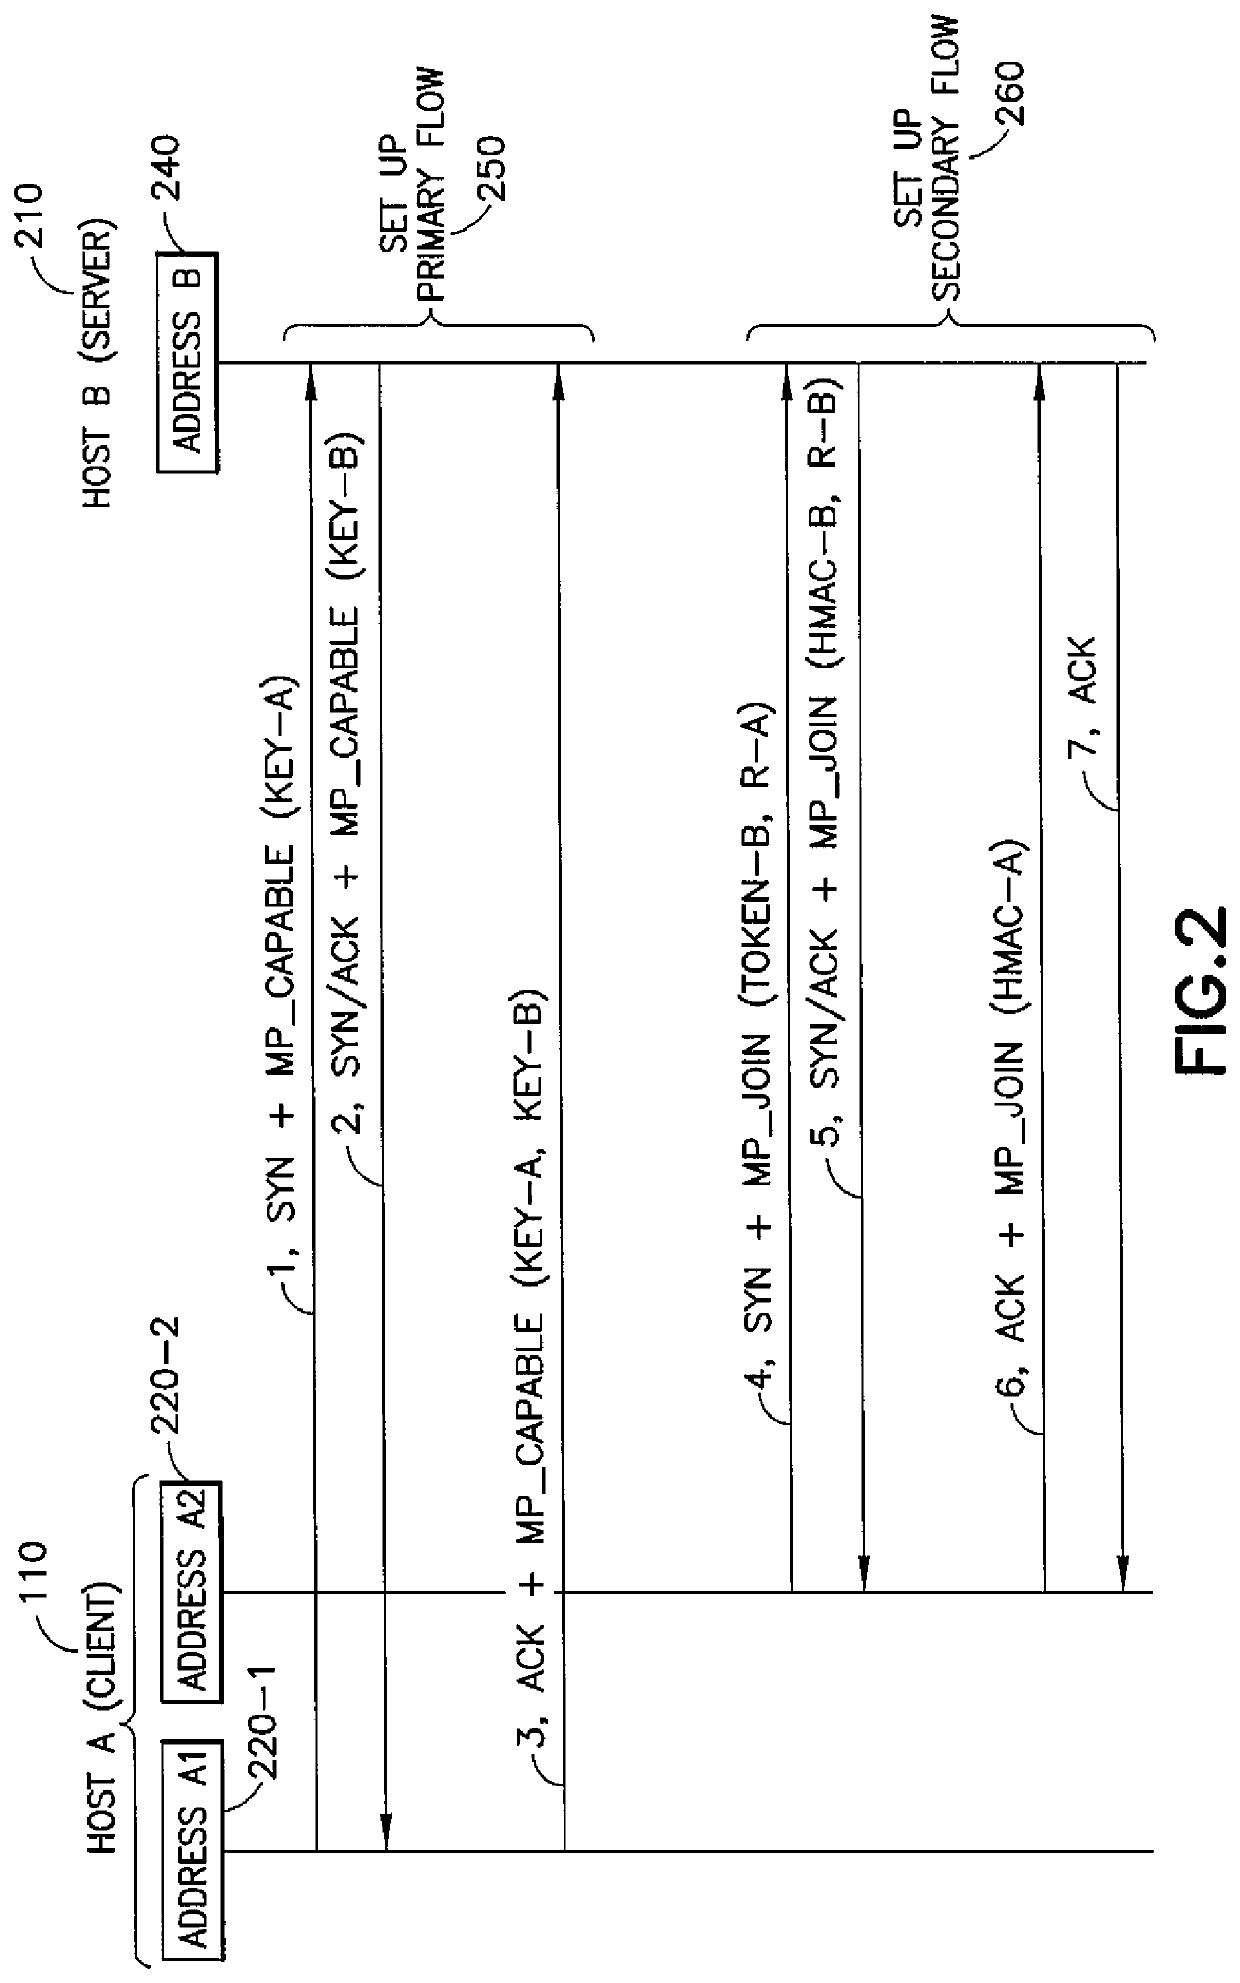 Designs of an MPTCP-Aware Load Balancer and Load Balancer Using the Designs